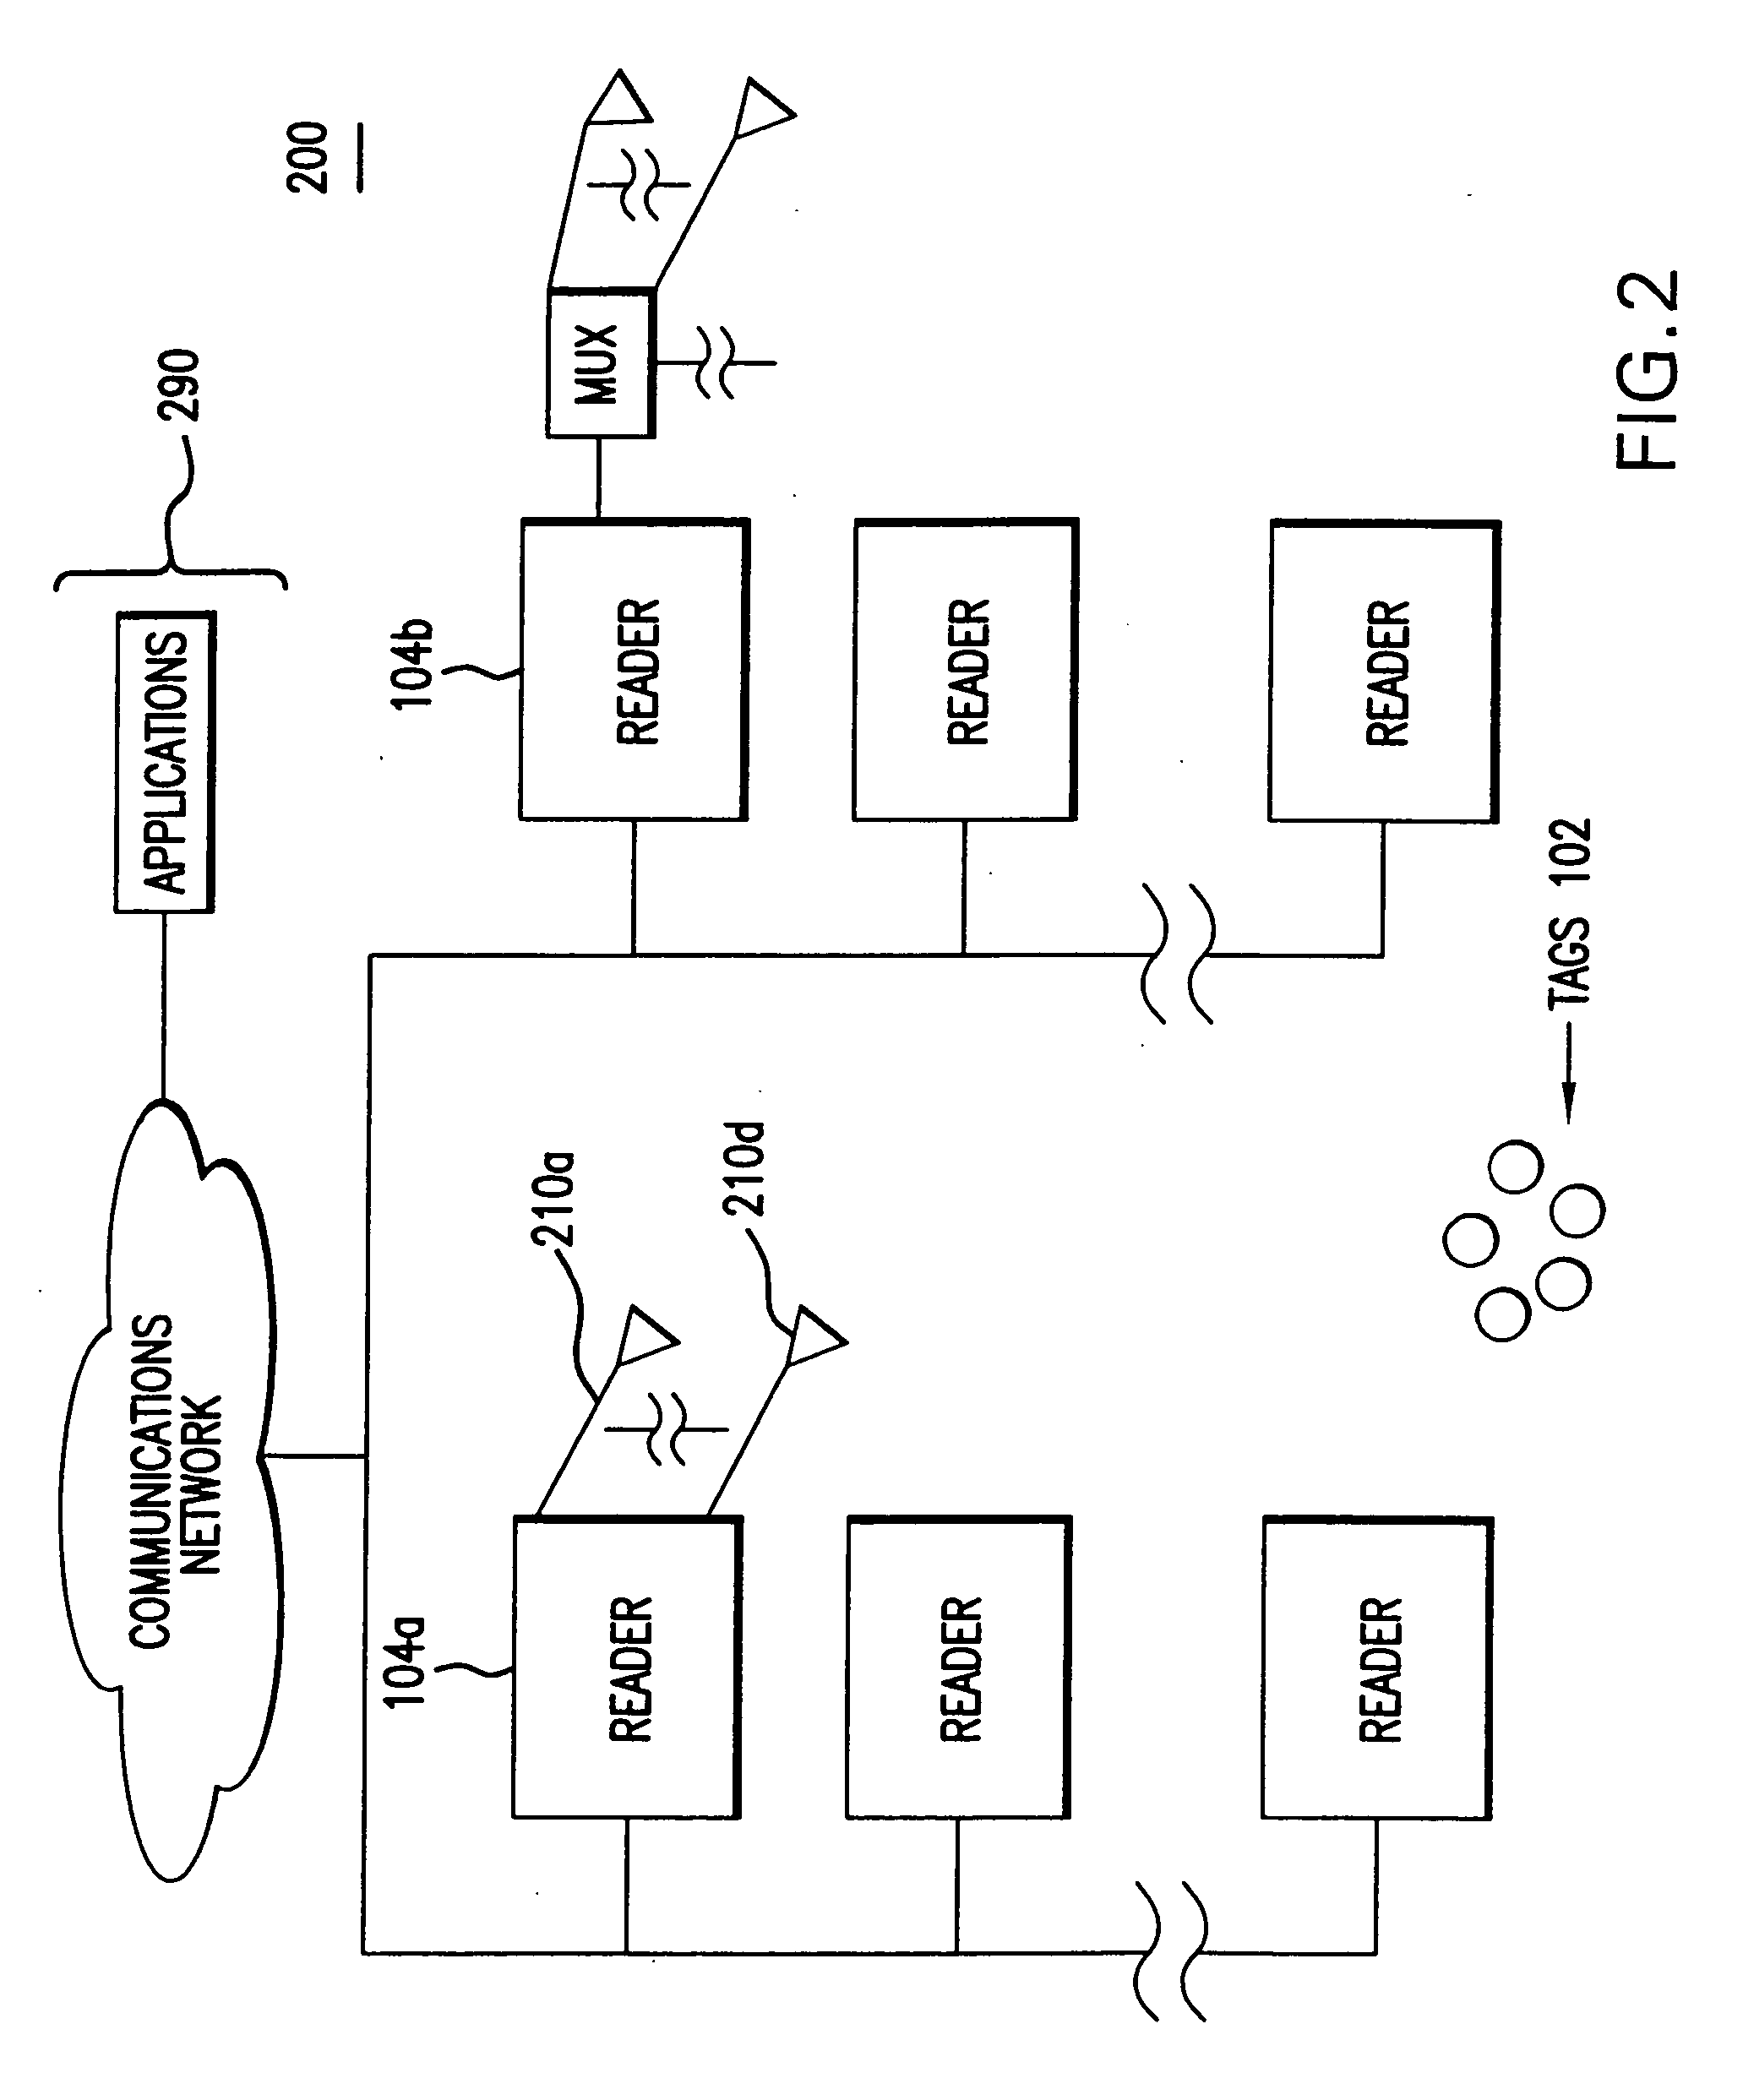 Methods and systems for the negotiation of a population of RFID tags with improved security